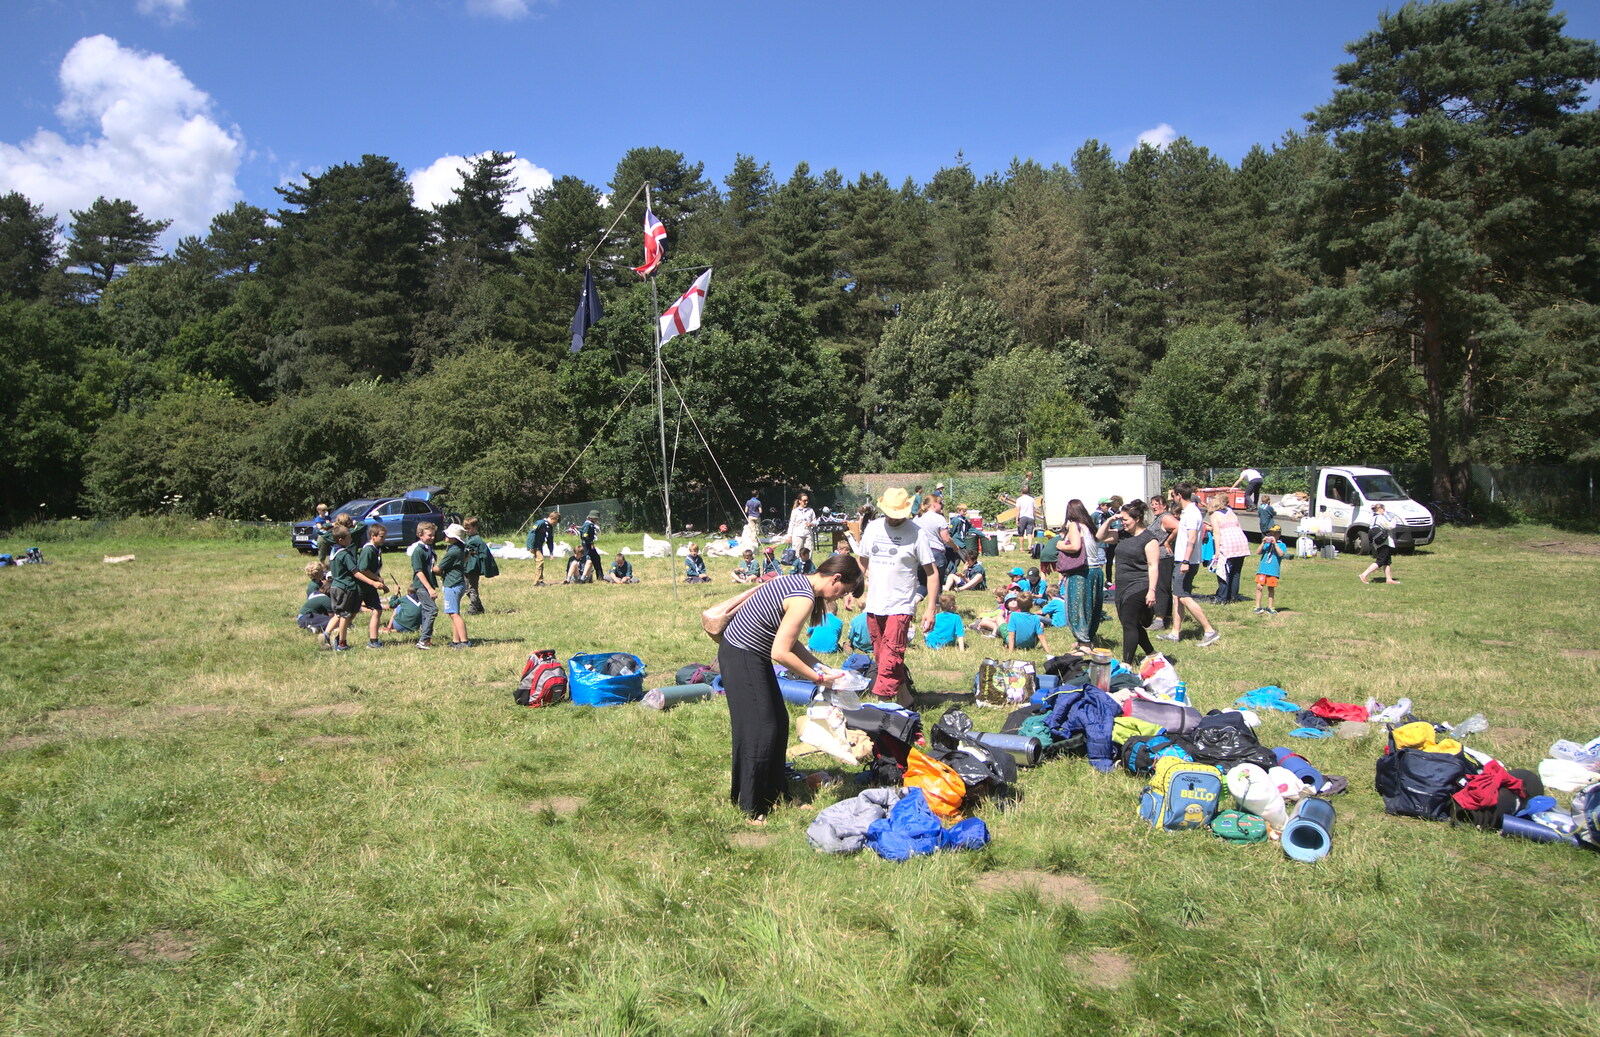 Chaos at the Beavers' campsite from Fred's Camping, Curry and the Closing of B&Q, Thetford, Diss  and Ipswich - 16th July 2016